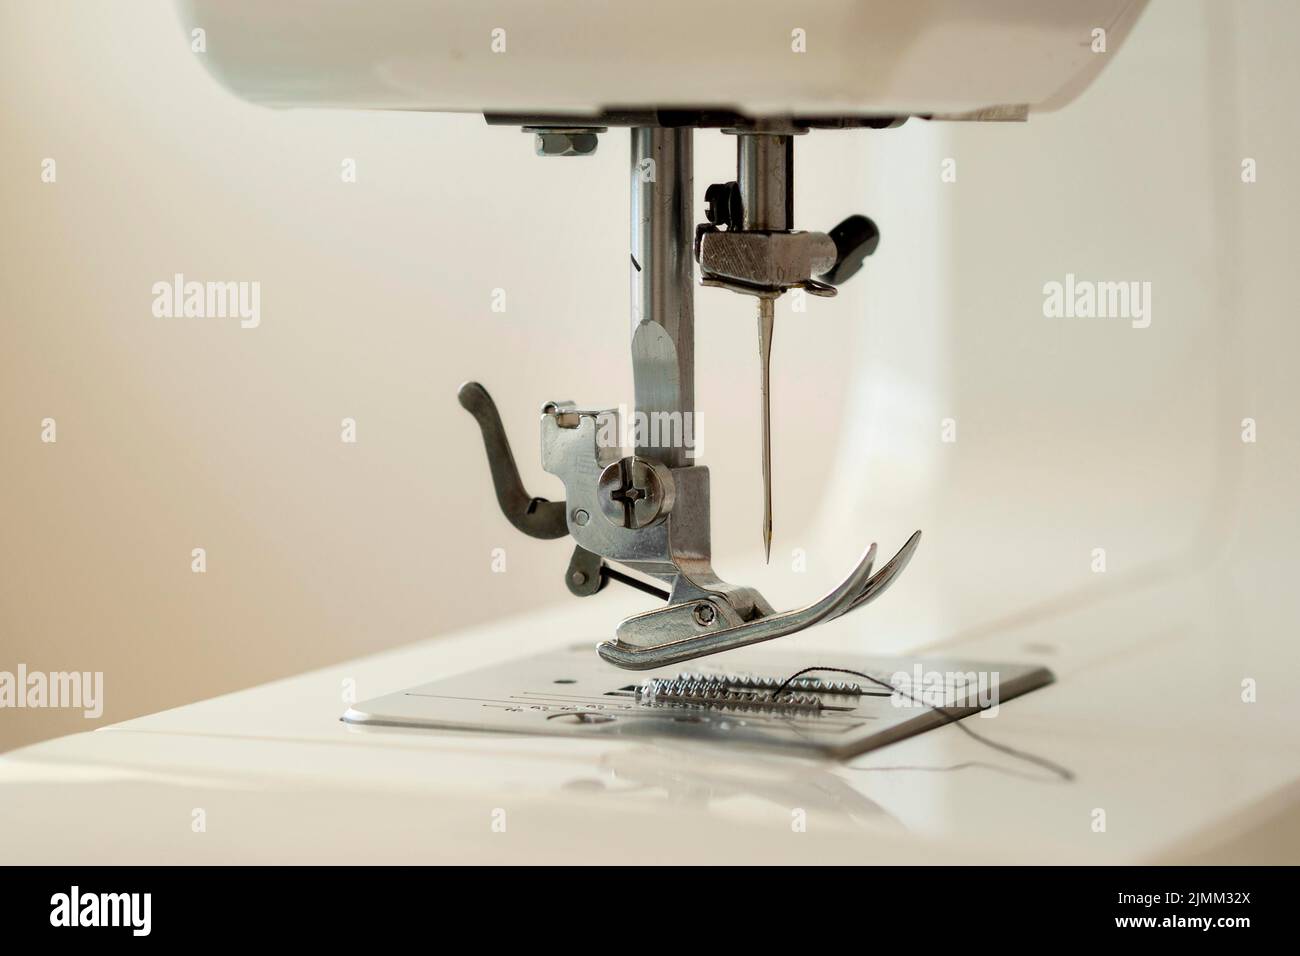 Front view sewing machine with needle Stock Photo